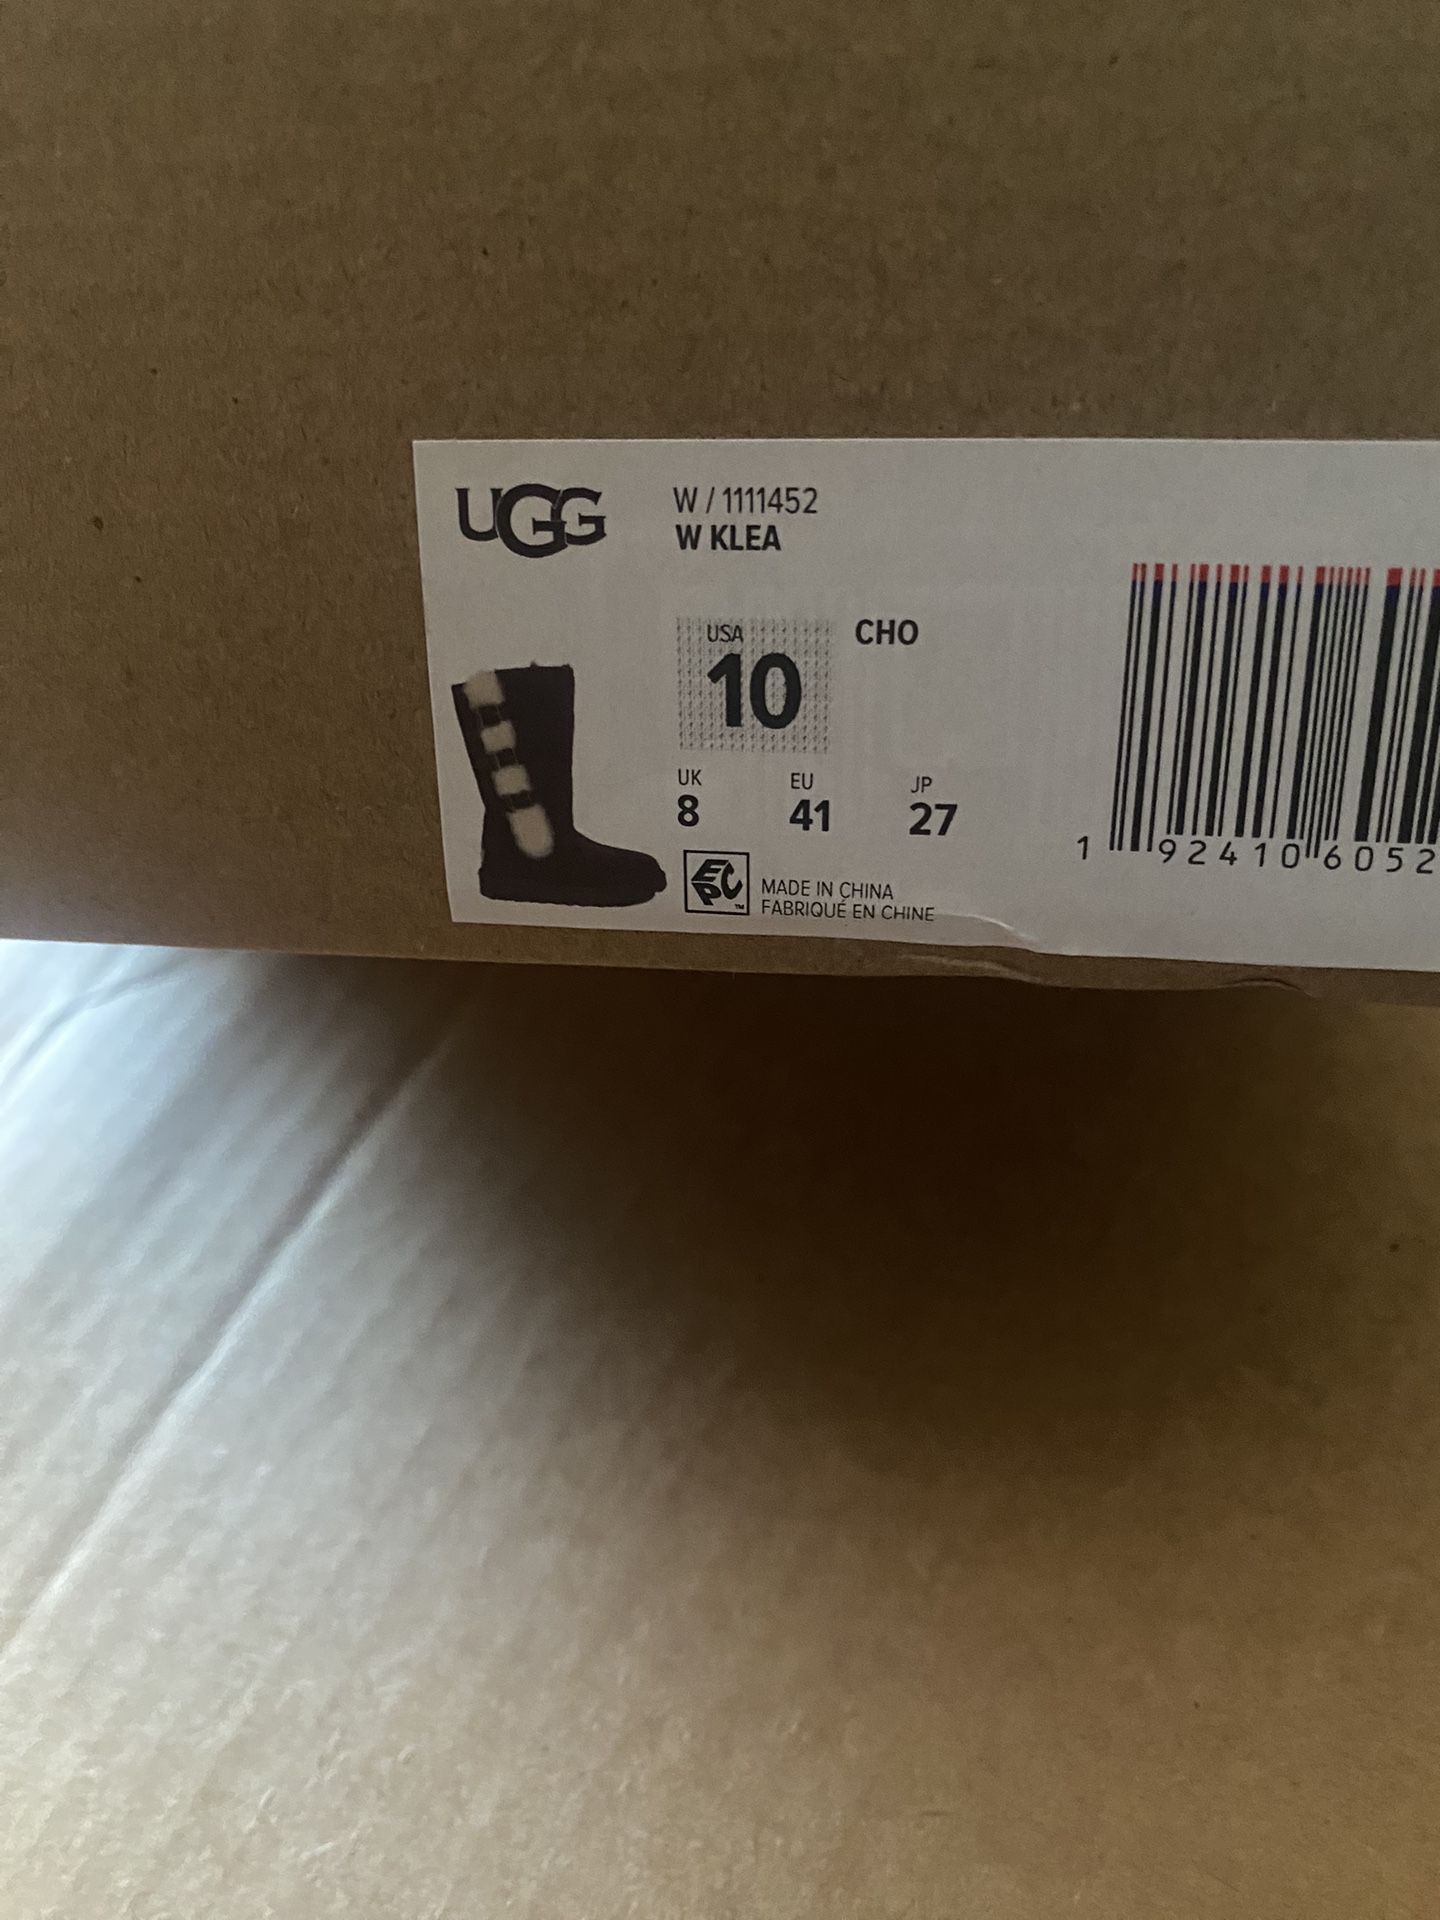 UGG Woman’s Boots 